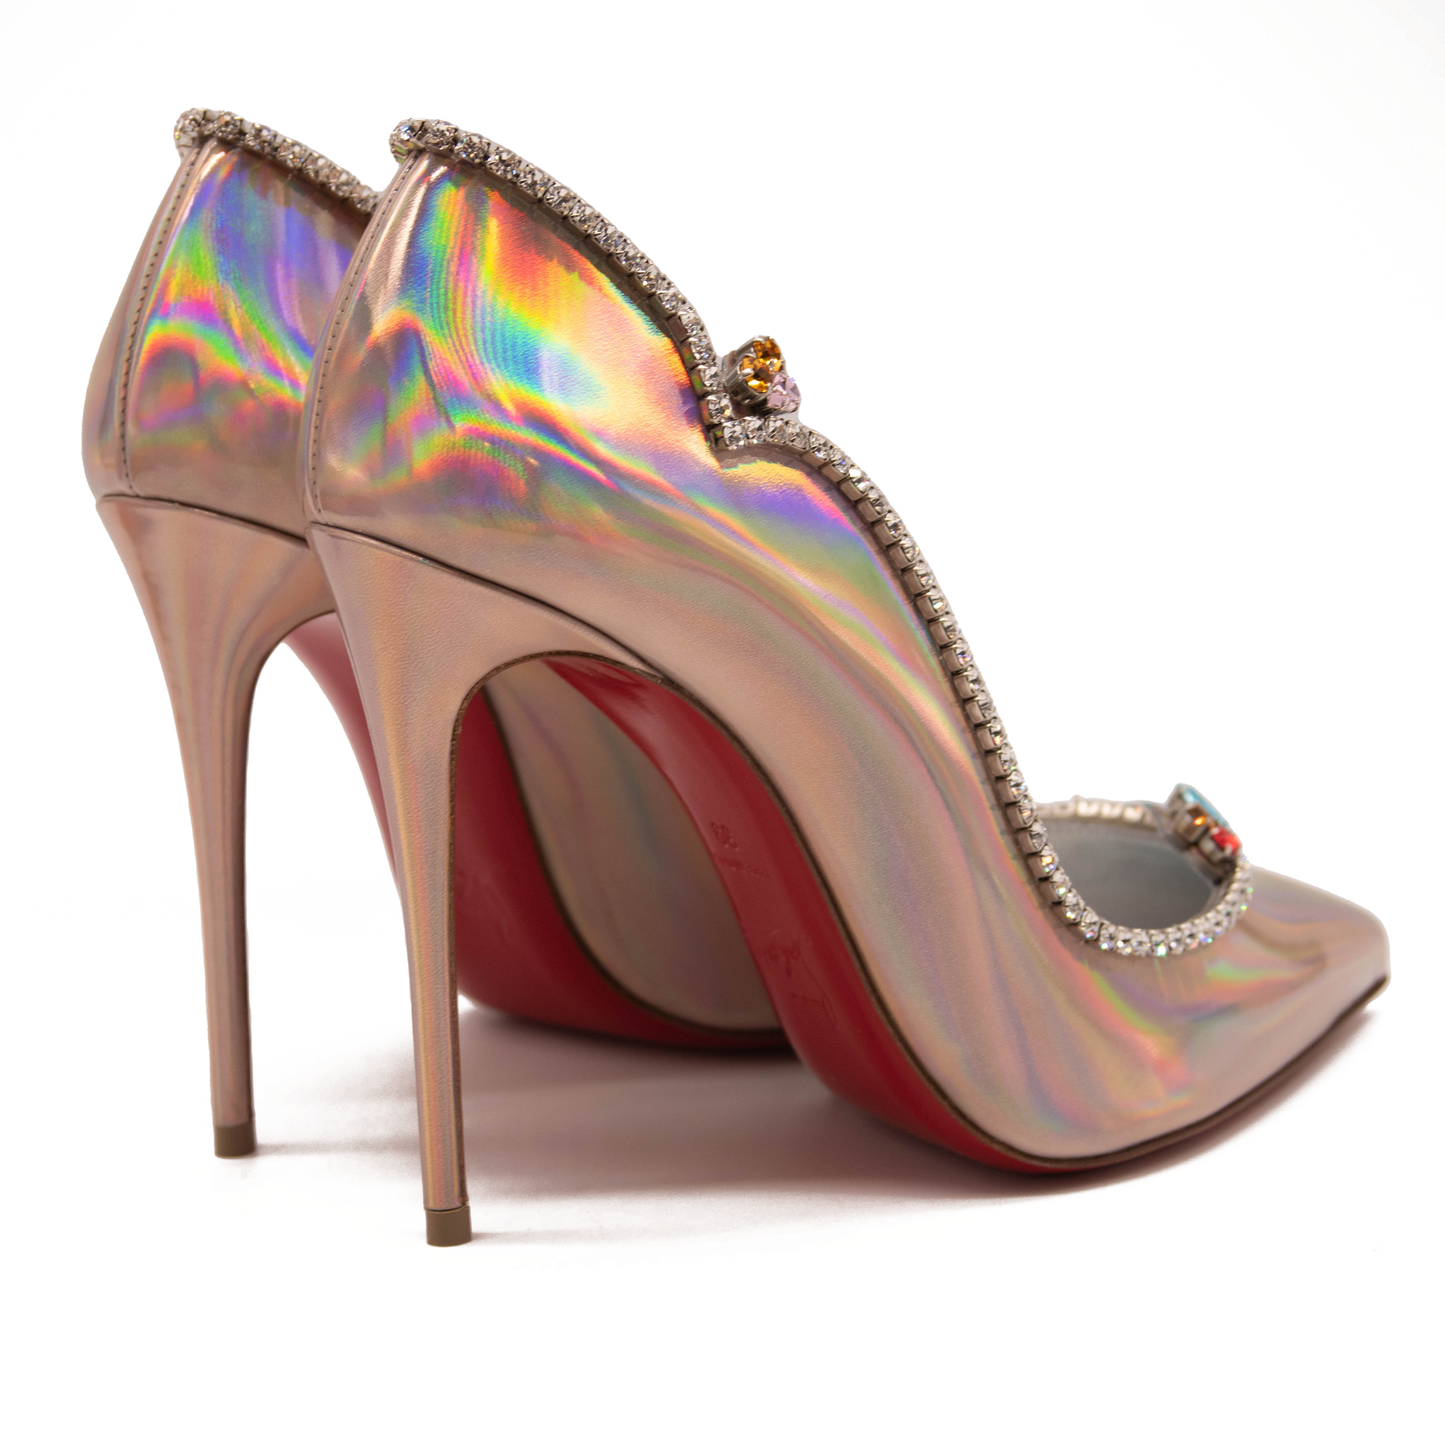 NEW Christian Louboutin Chick Queen Pointed Toe Pump Wood Rose 37.5 EU